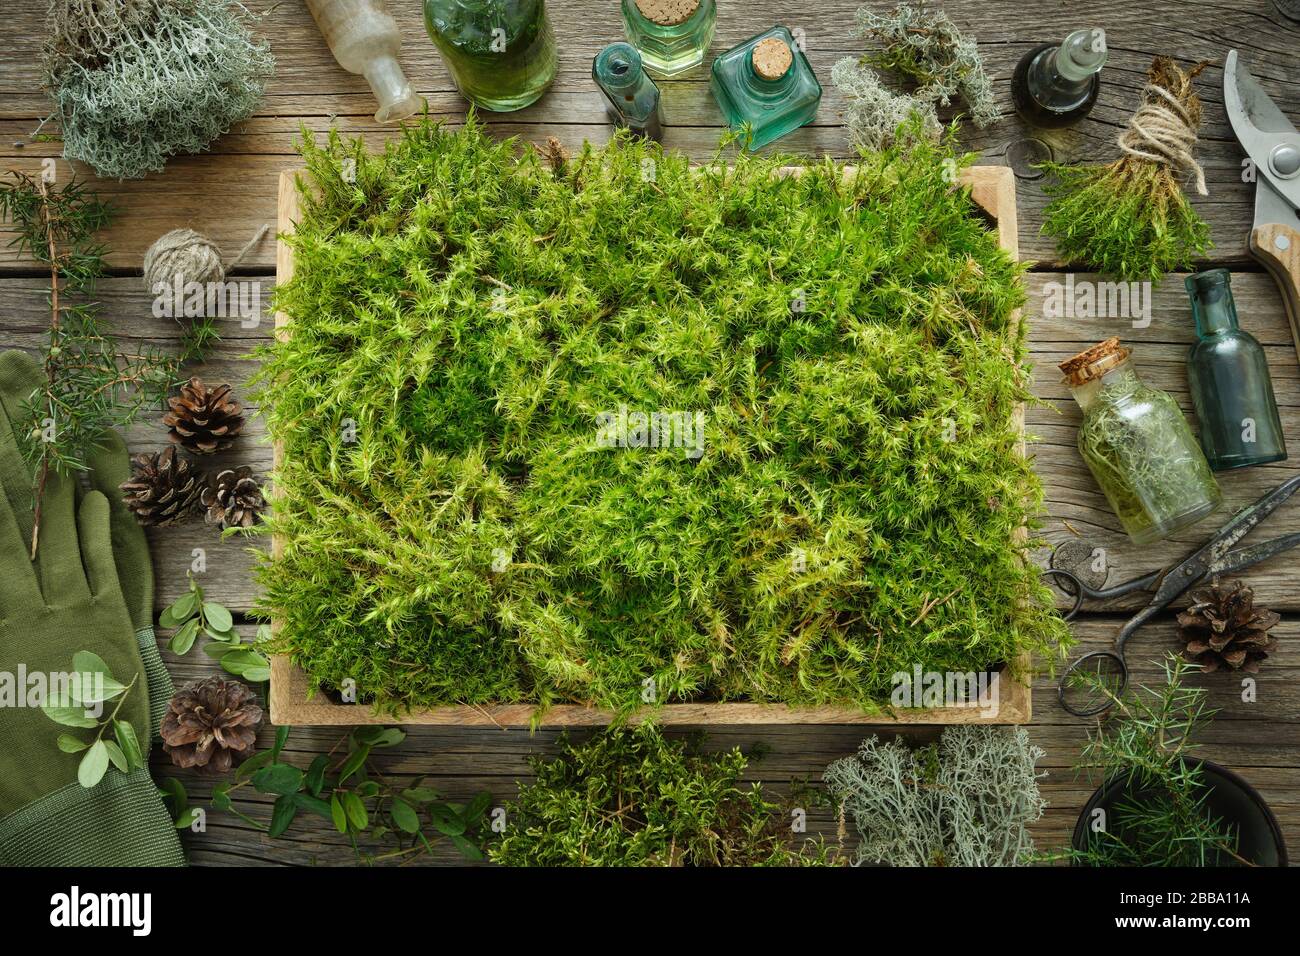 Healthy tinctures and oil bottles, wooden box of healthy common haircap moss, lichen, moss, juniper, pine cones on wooden table. Herbal medicine. Stock Photo